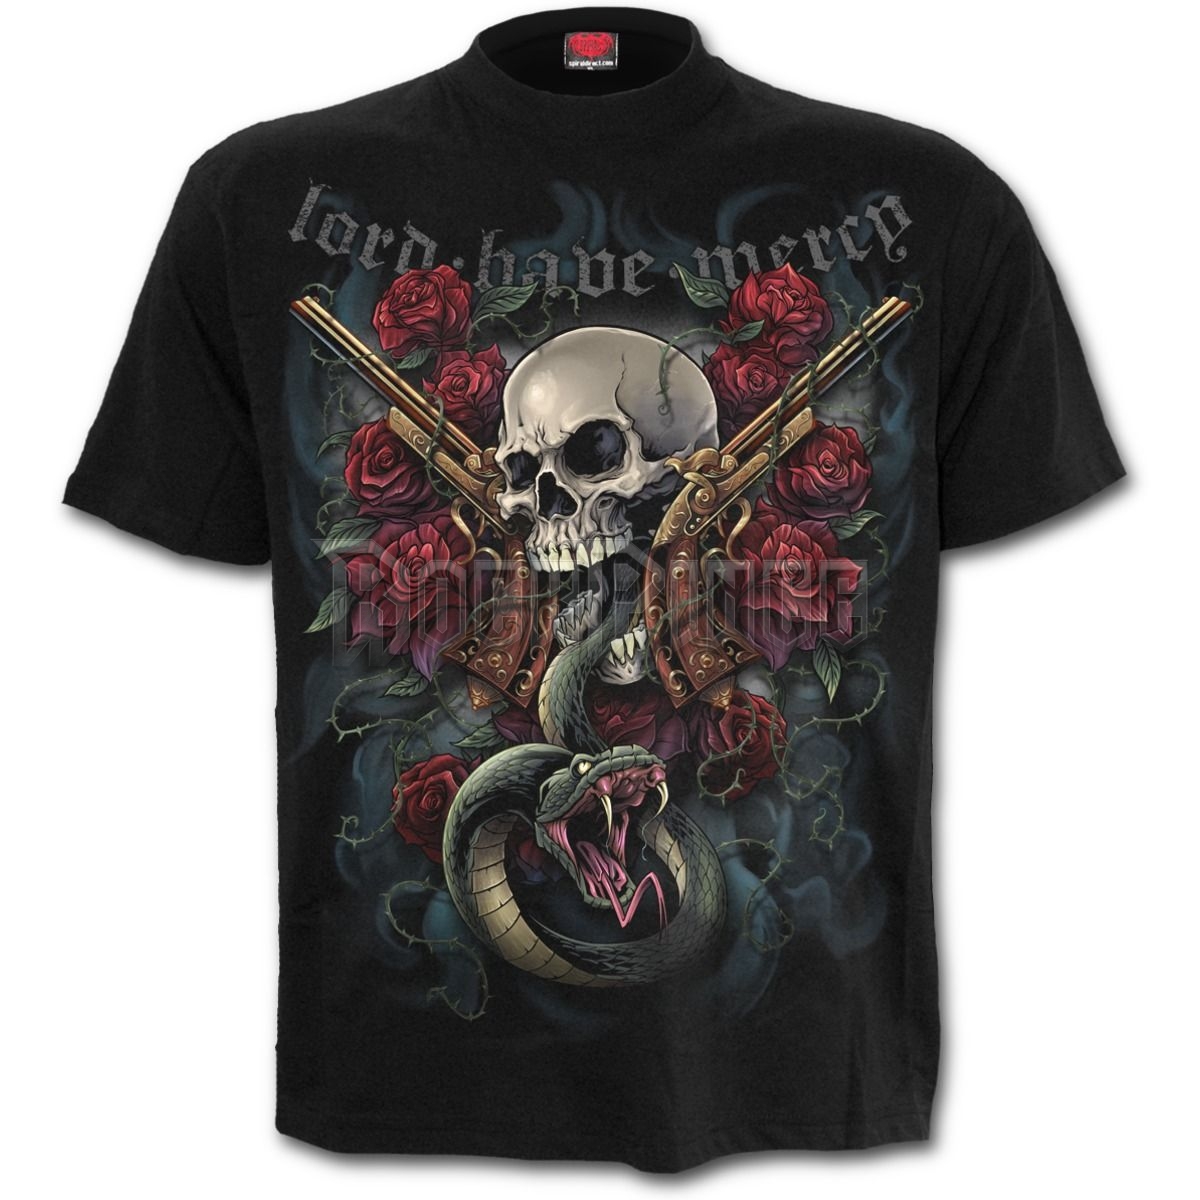 LORD HAVE MERCY - T-Shirt Black - T153M101